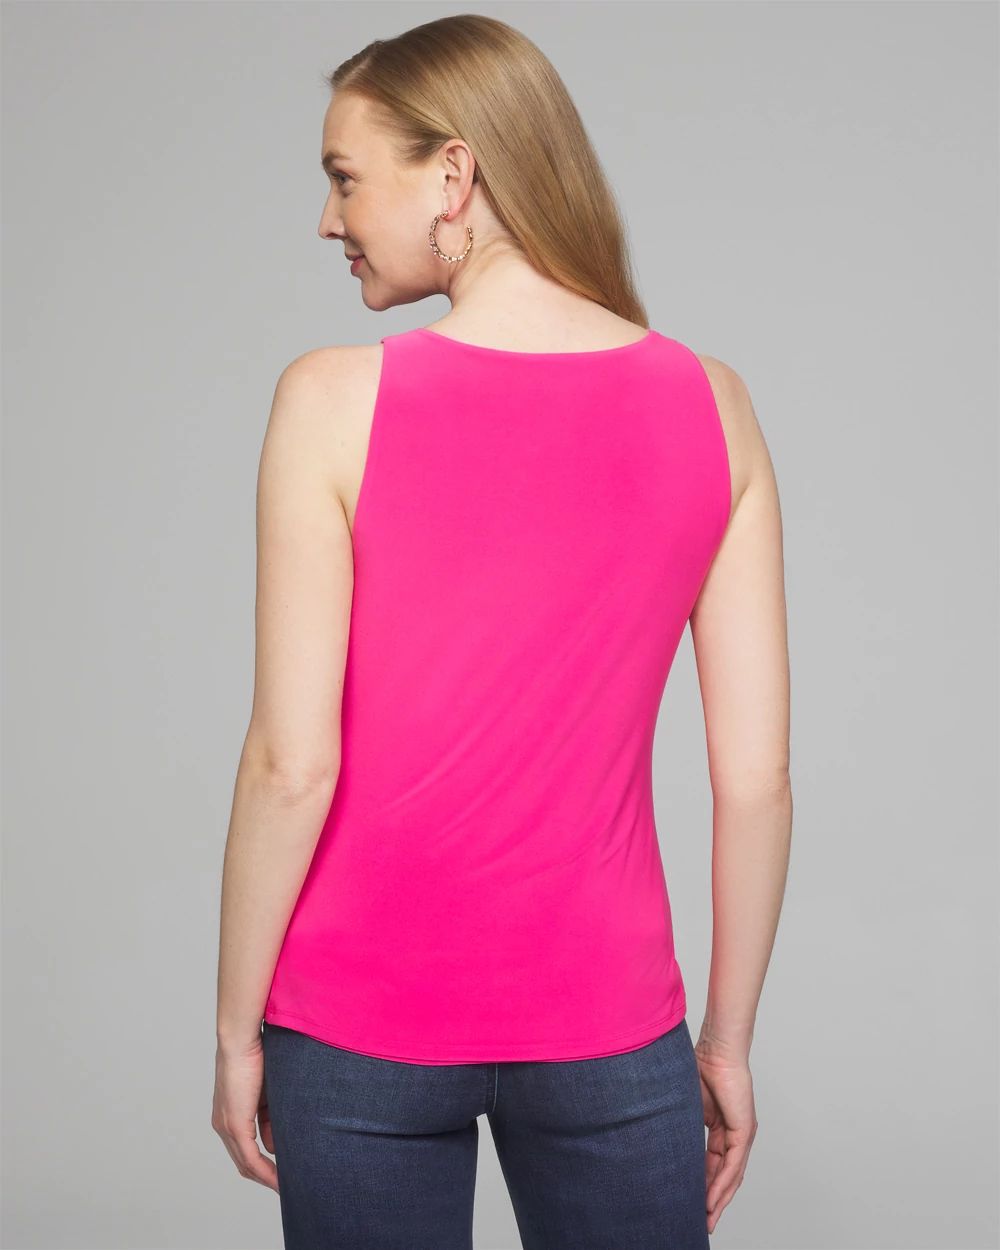 Outlet WHBM Sleeveless Keyhole Cutout Top click to view larger image.